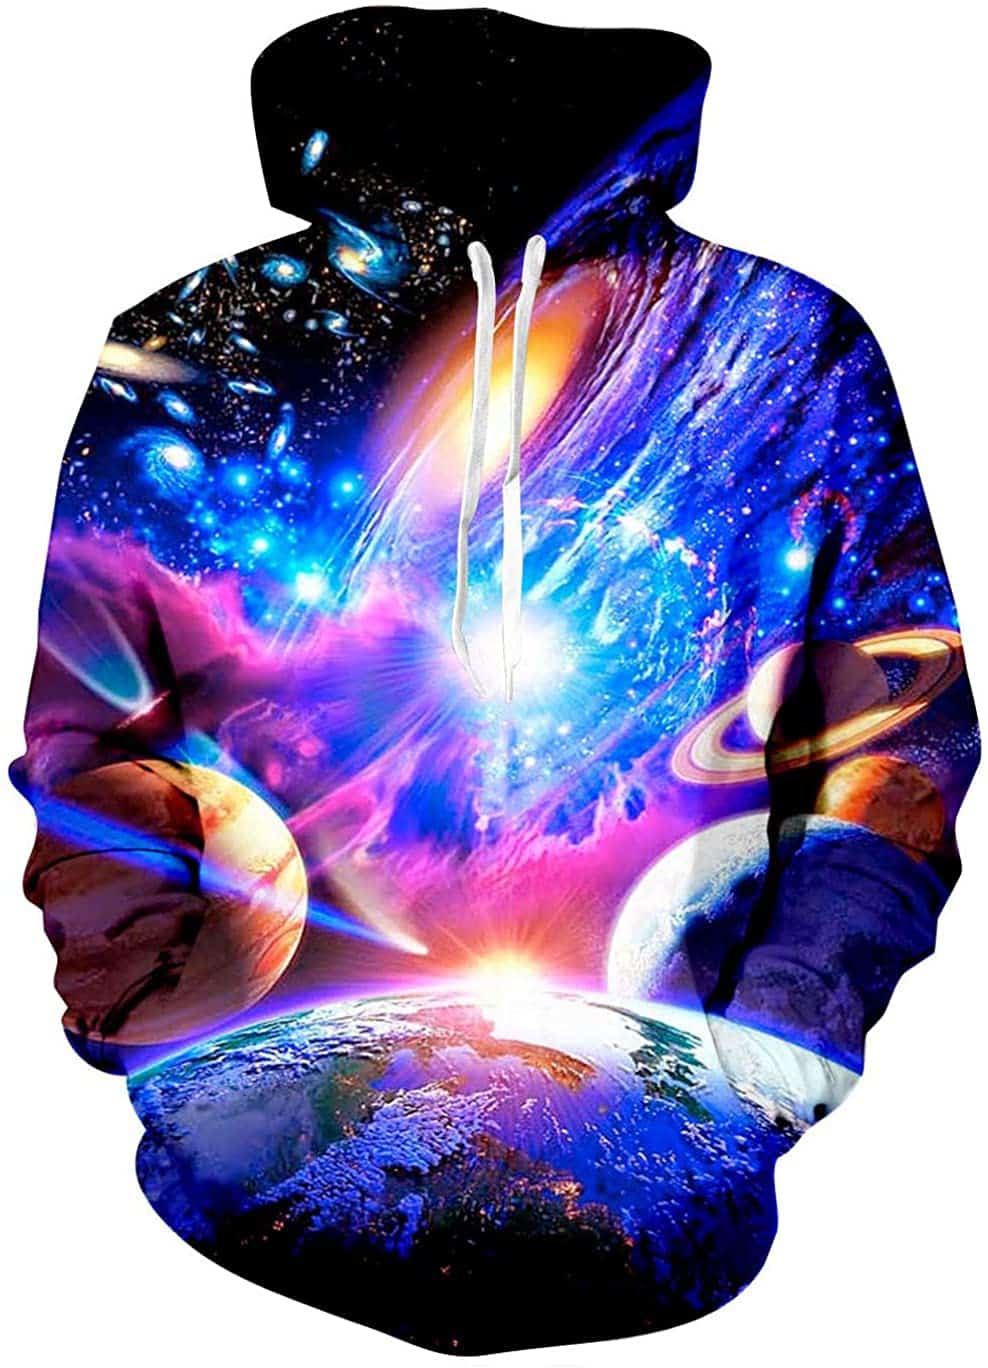 Hgvoetty Unisex 3D Print Shirts Colorful Space Graphic Tees for Men Women Teens 